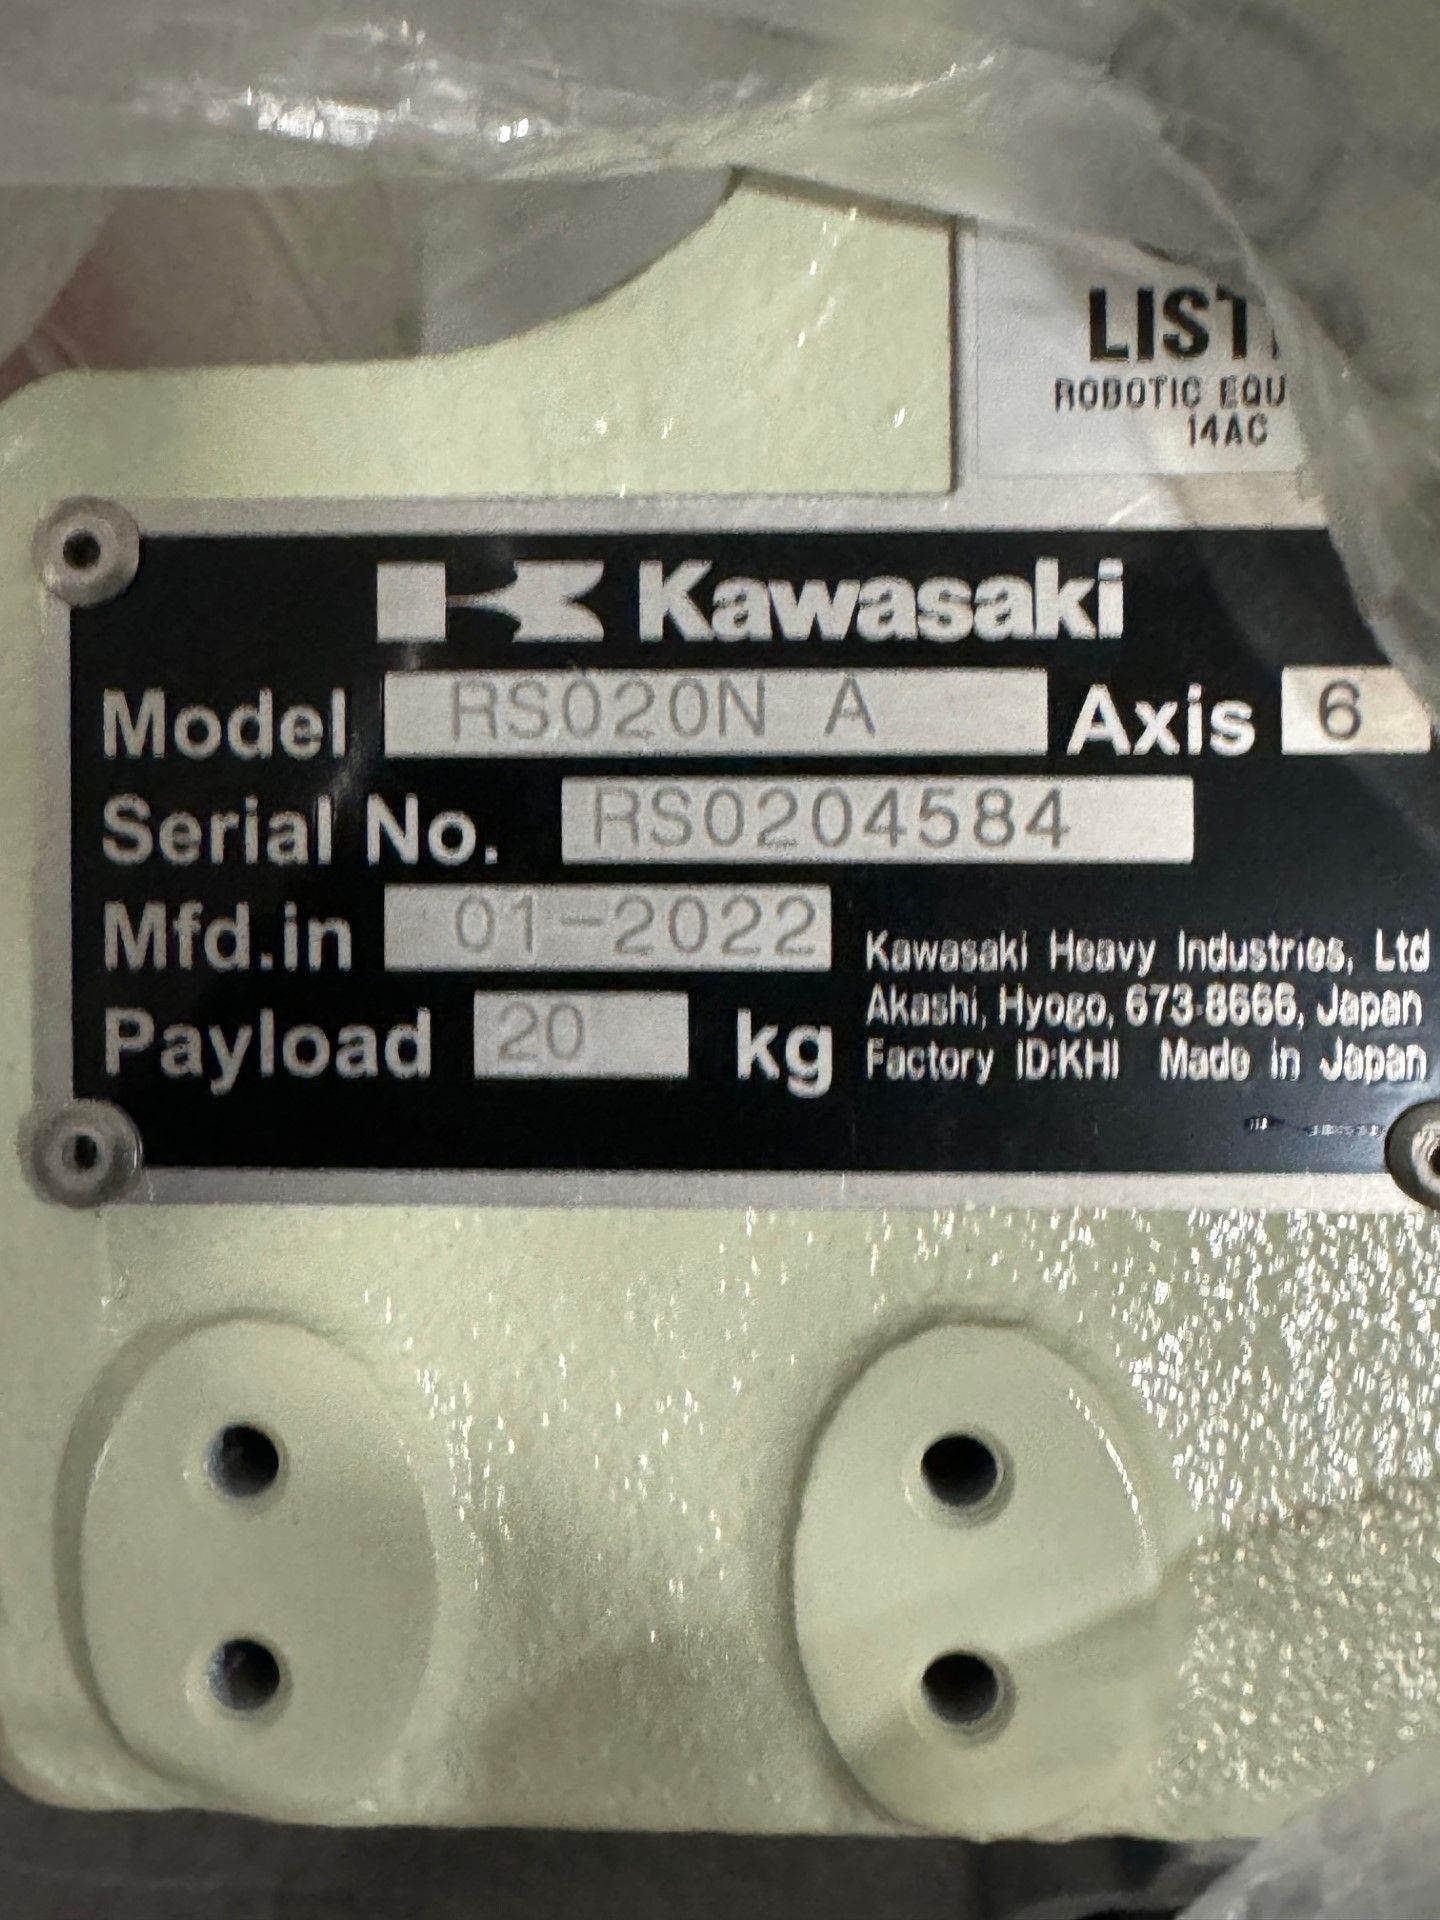 NEW KAWASAKI ROBOT MODEL RS020N, SN 4584, 20KG X 1725MM REACH WITH EO1 CONTROLS, CABLES & TEACH - Image 7 of 7